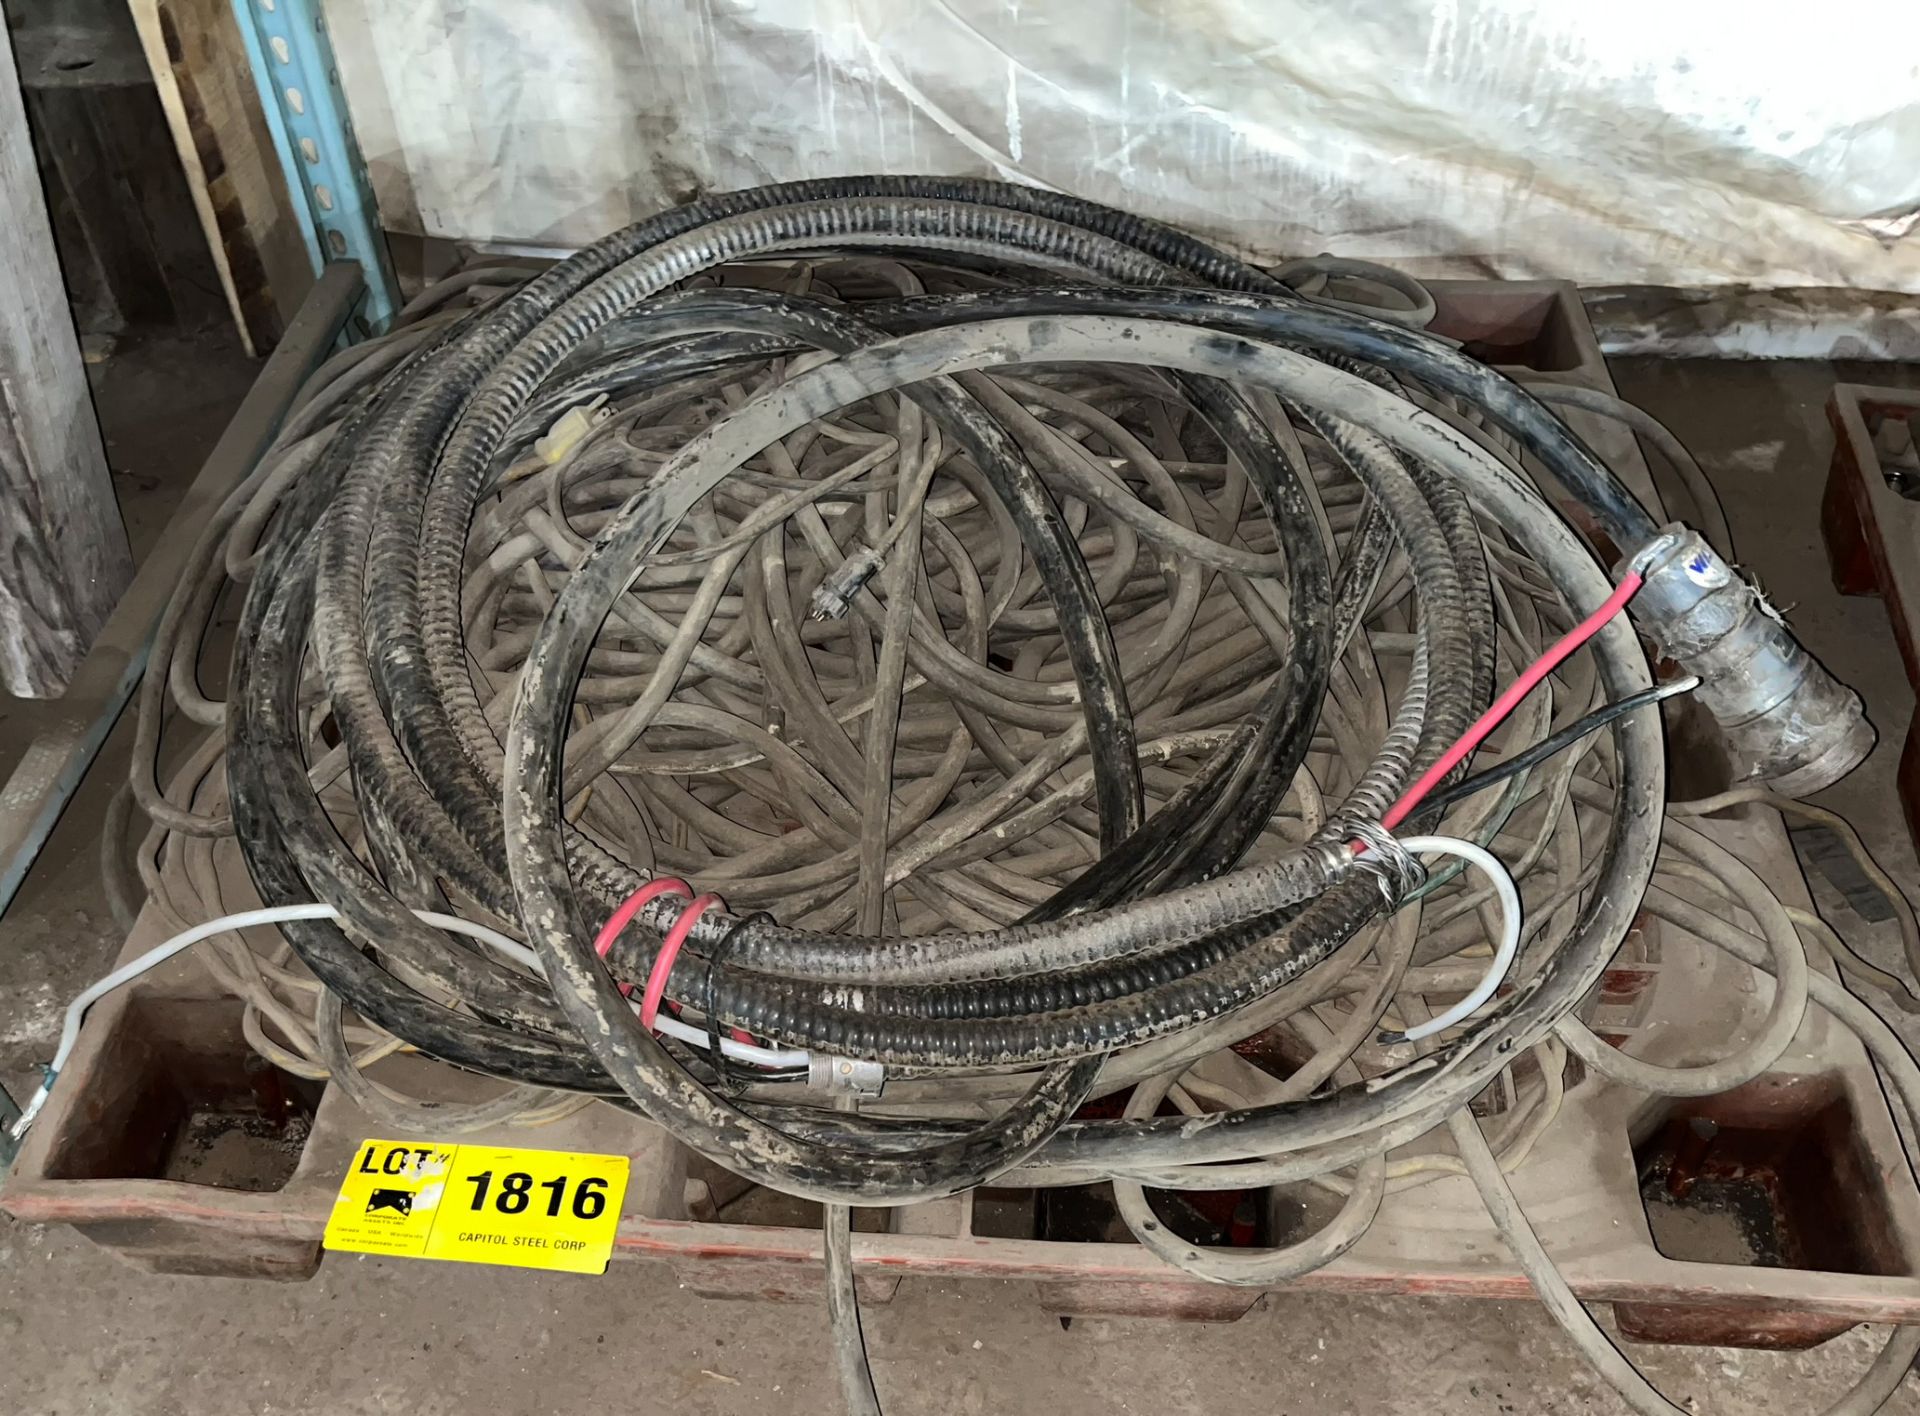 LOT/ SKID OF ELECTRICAL CABLES [RIGGING FEES FOR LOT #1816 - $50 USD PLUS APPLICABLE TAXES]